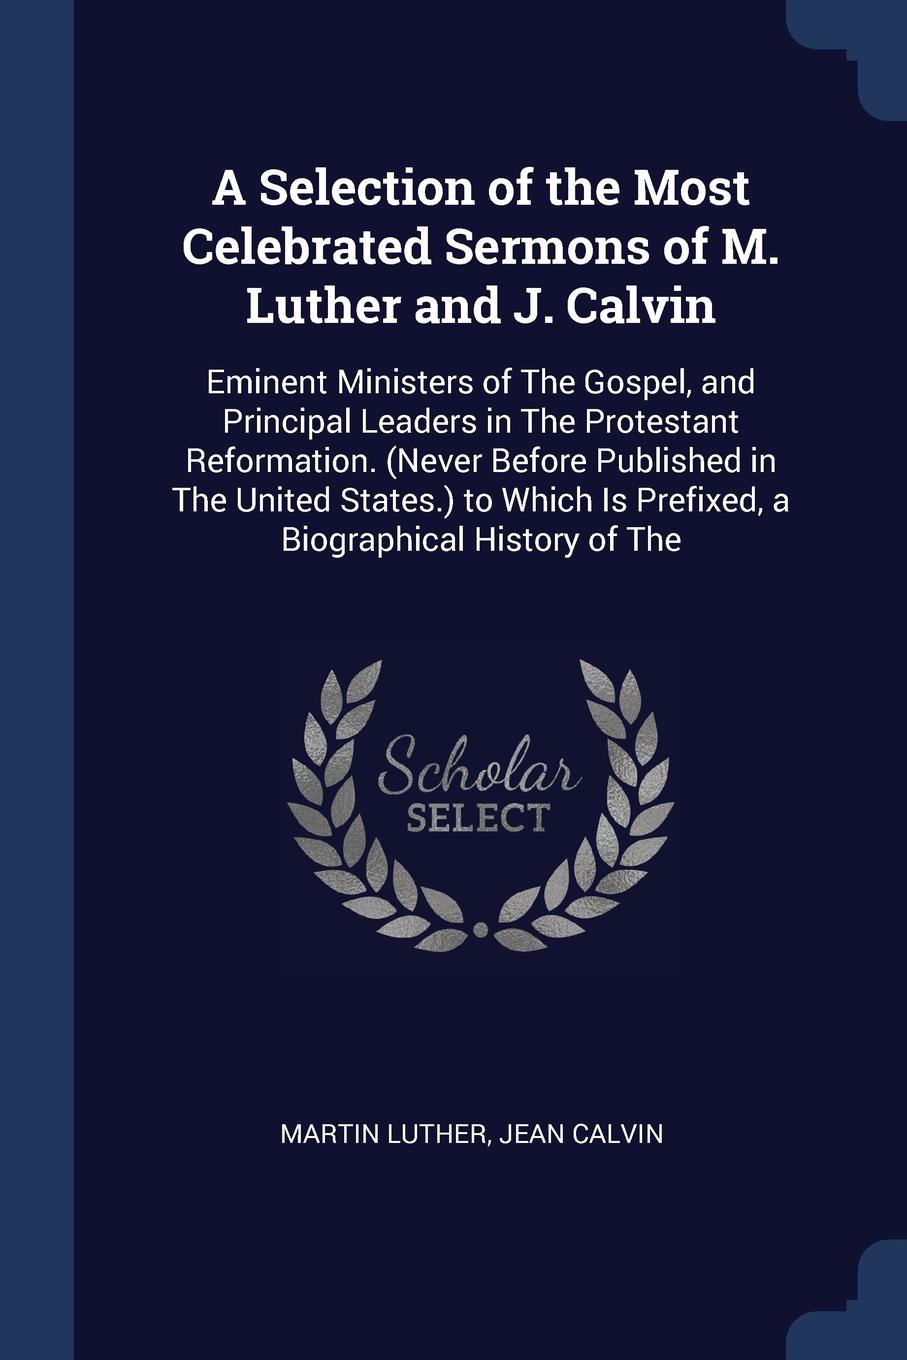 A Selection of the Most Celebrated Sermons of M. Luther and J. Calvin. Eminent Ministers of The Gospel, and Principal Leaders in The Protestant Reformation. (Never Before Published in The United States.) to Which Is Prefixed, a Biographical Histor...